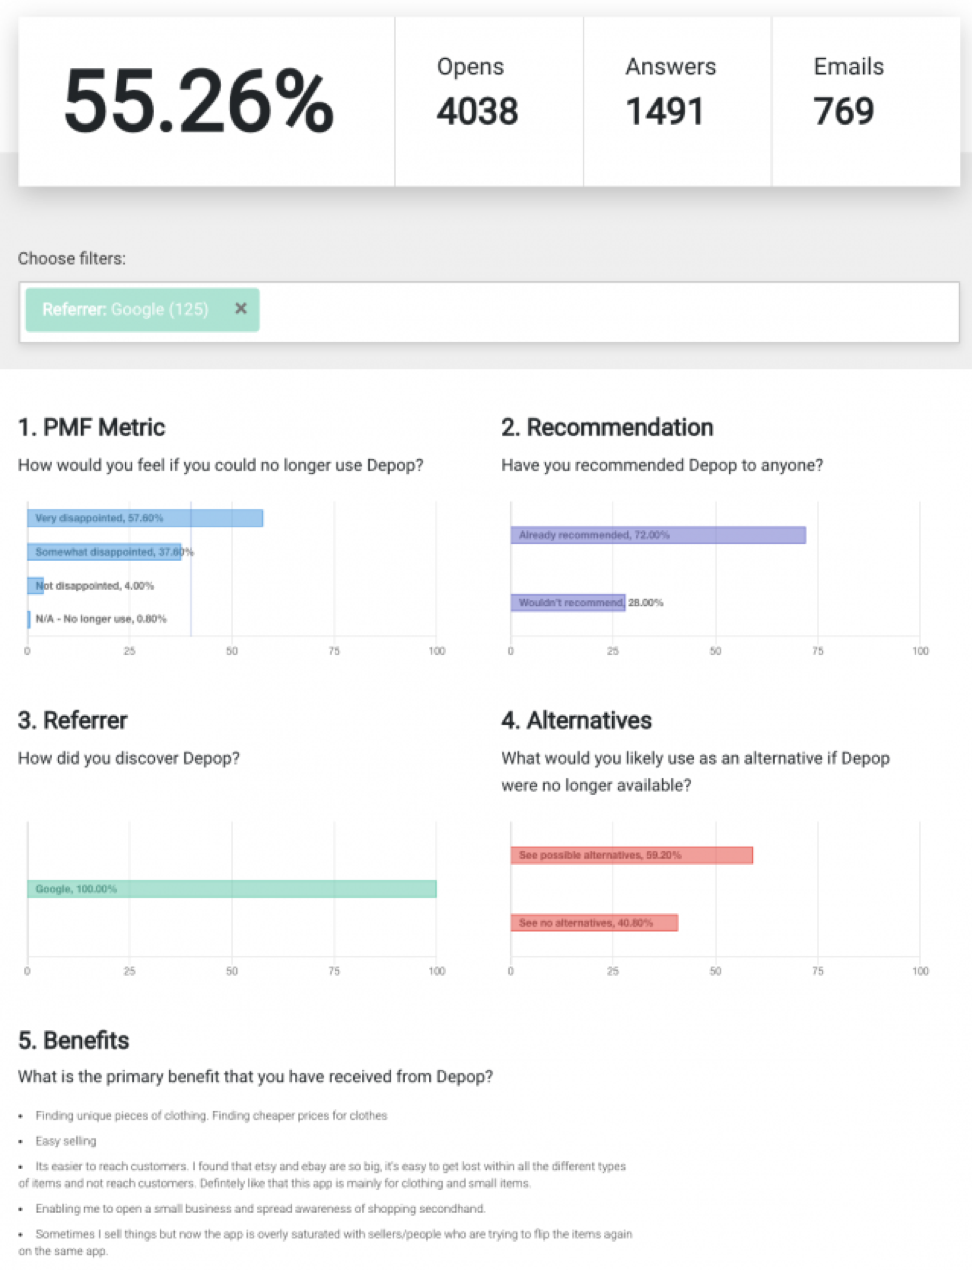 With PMFsurvey, you can create a survey from Sean Ellis in one click, then send it to your users (the survey is automatically translated into all major languages). You can then analyze the results and receive product insights with the help of a convenient visual interface. You will be able to easily filter different user segments and get insights that will drive your product development process.